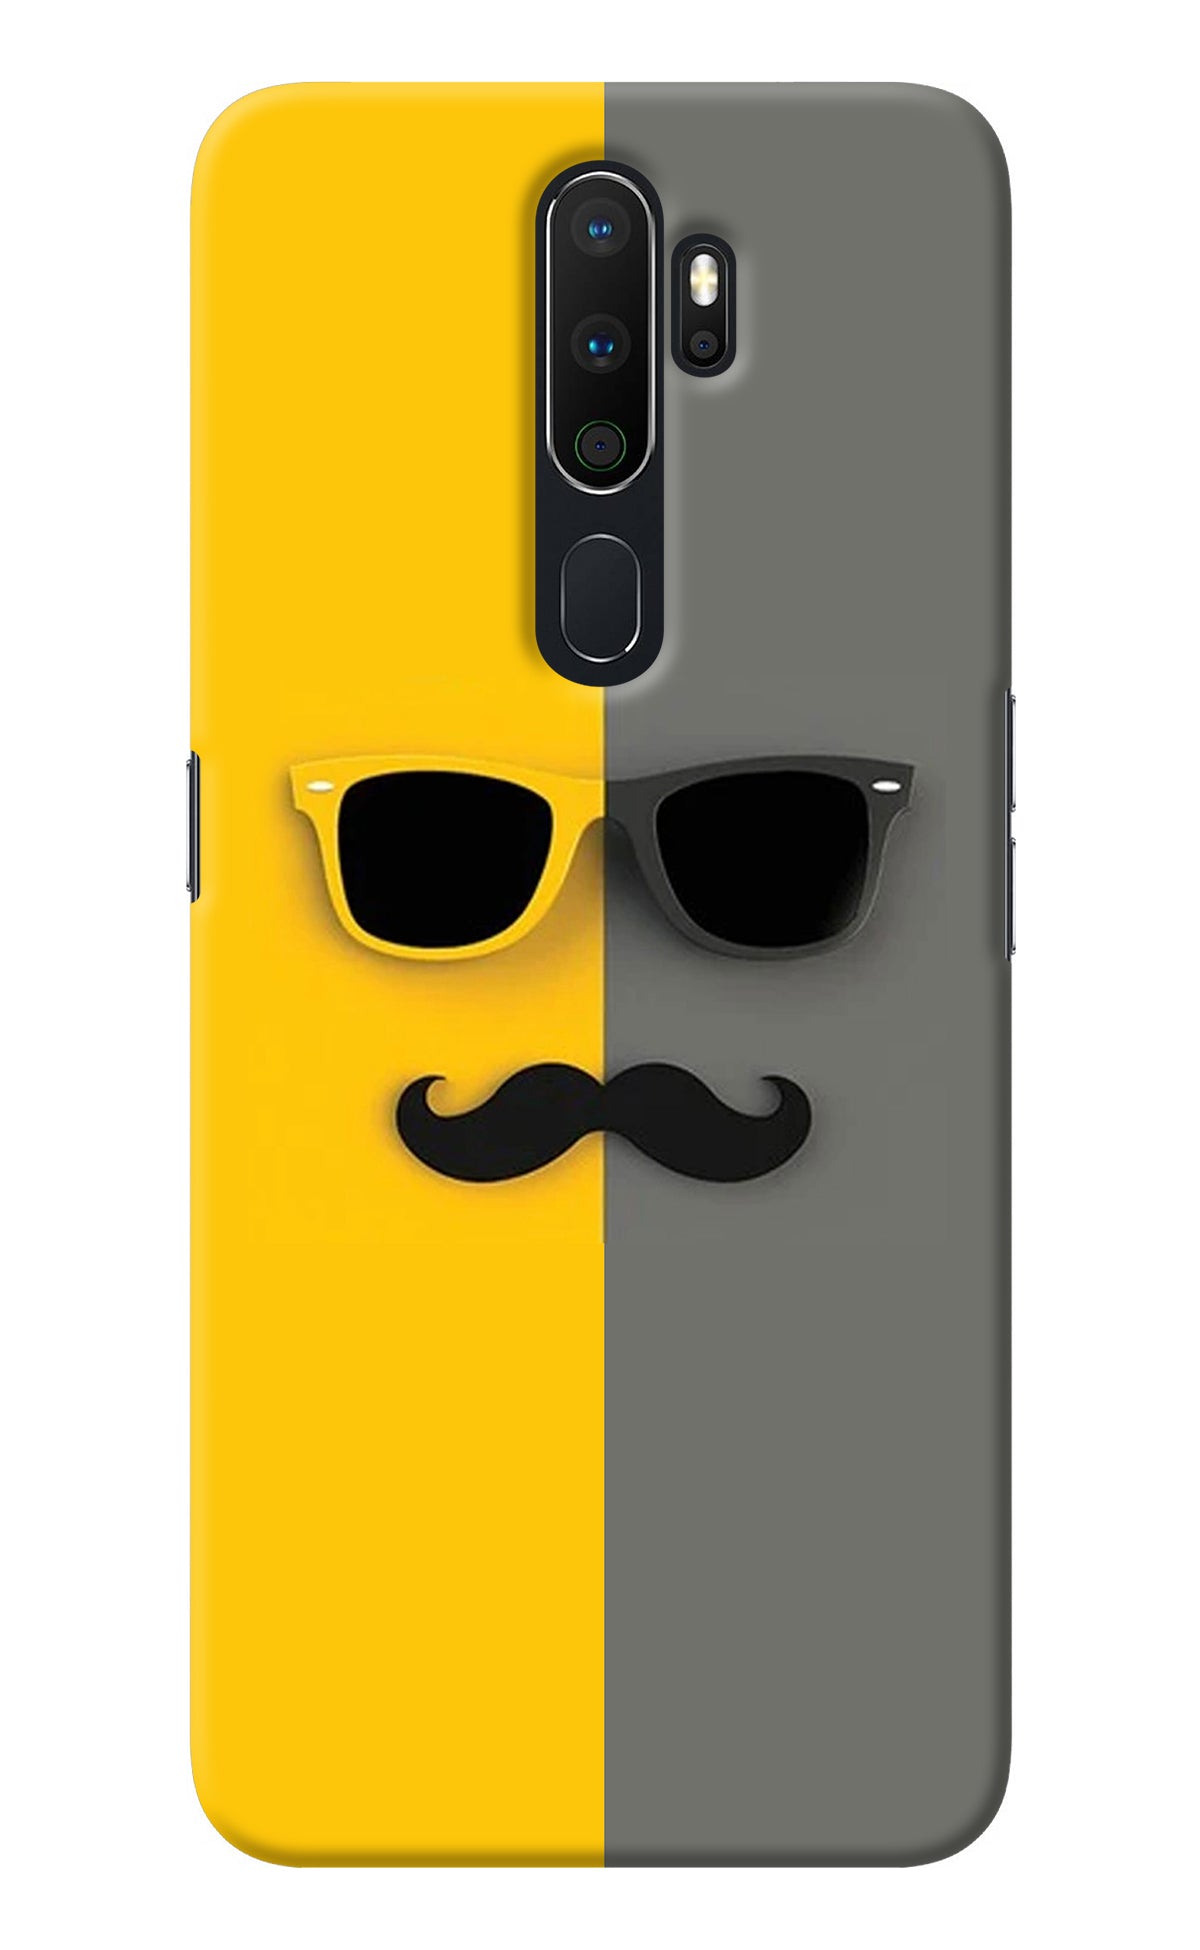 Sunglasses with Mustache Oppo A5 2020/A9 2020 Back Cover